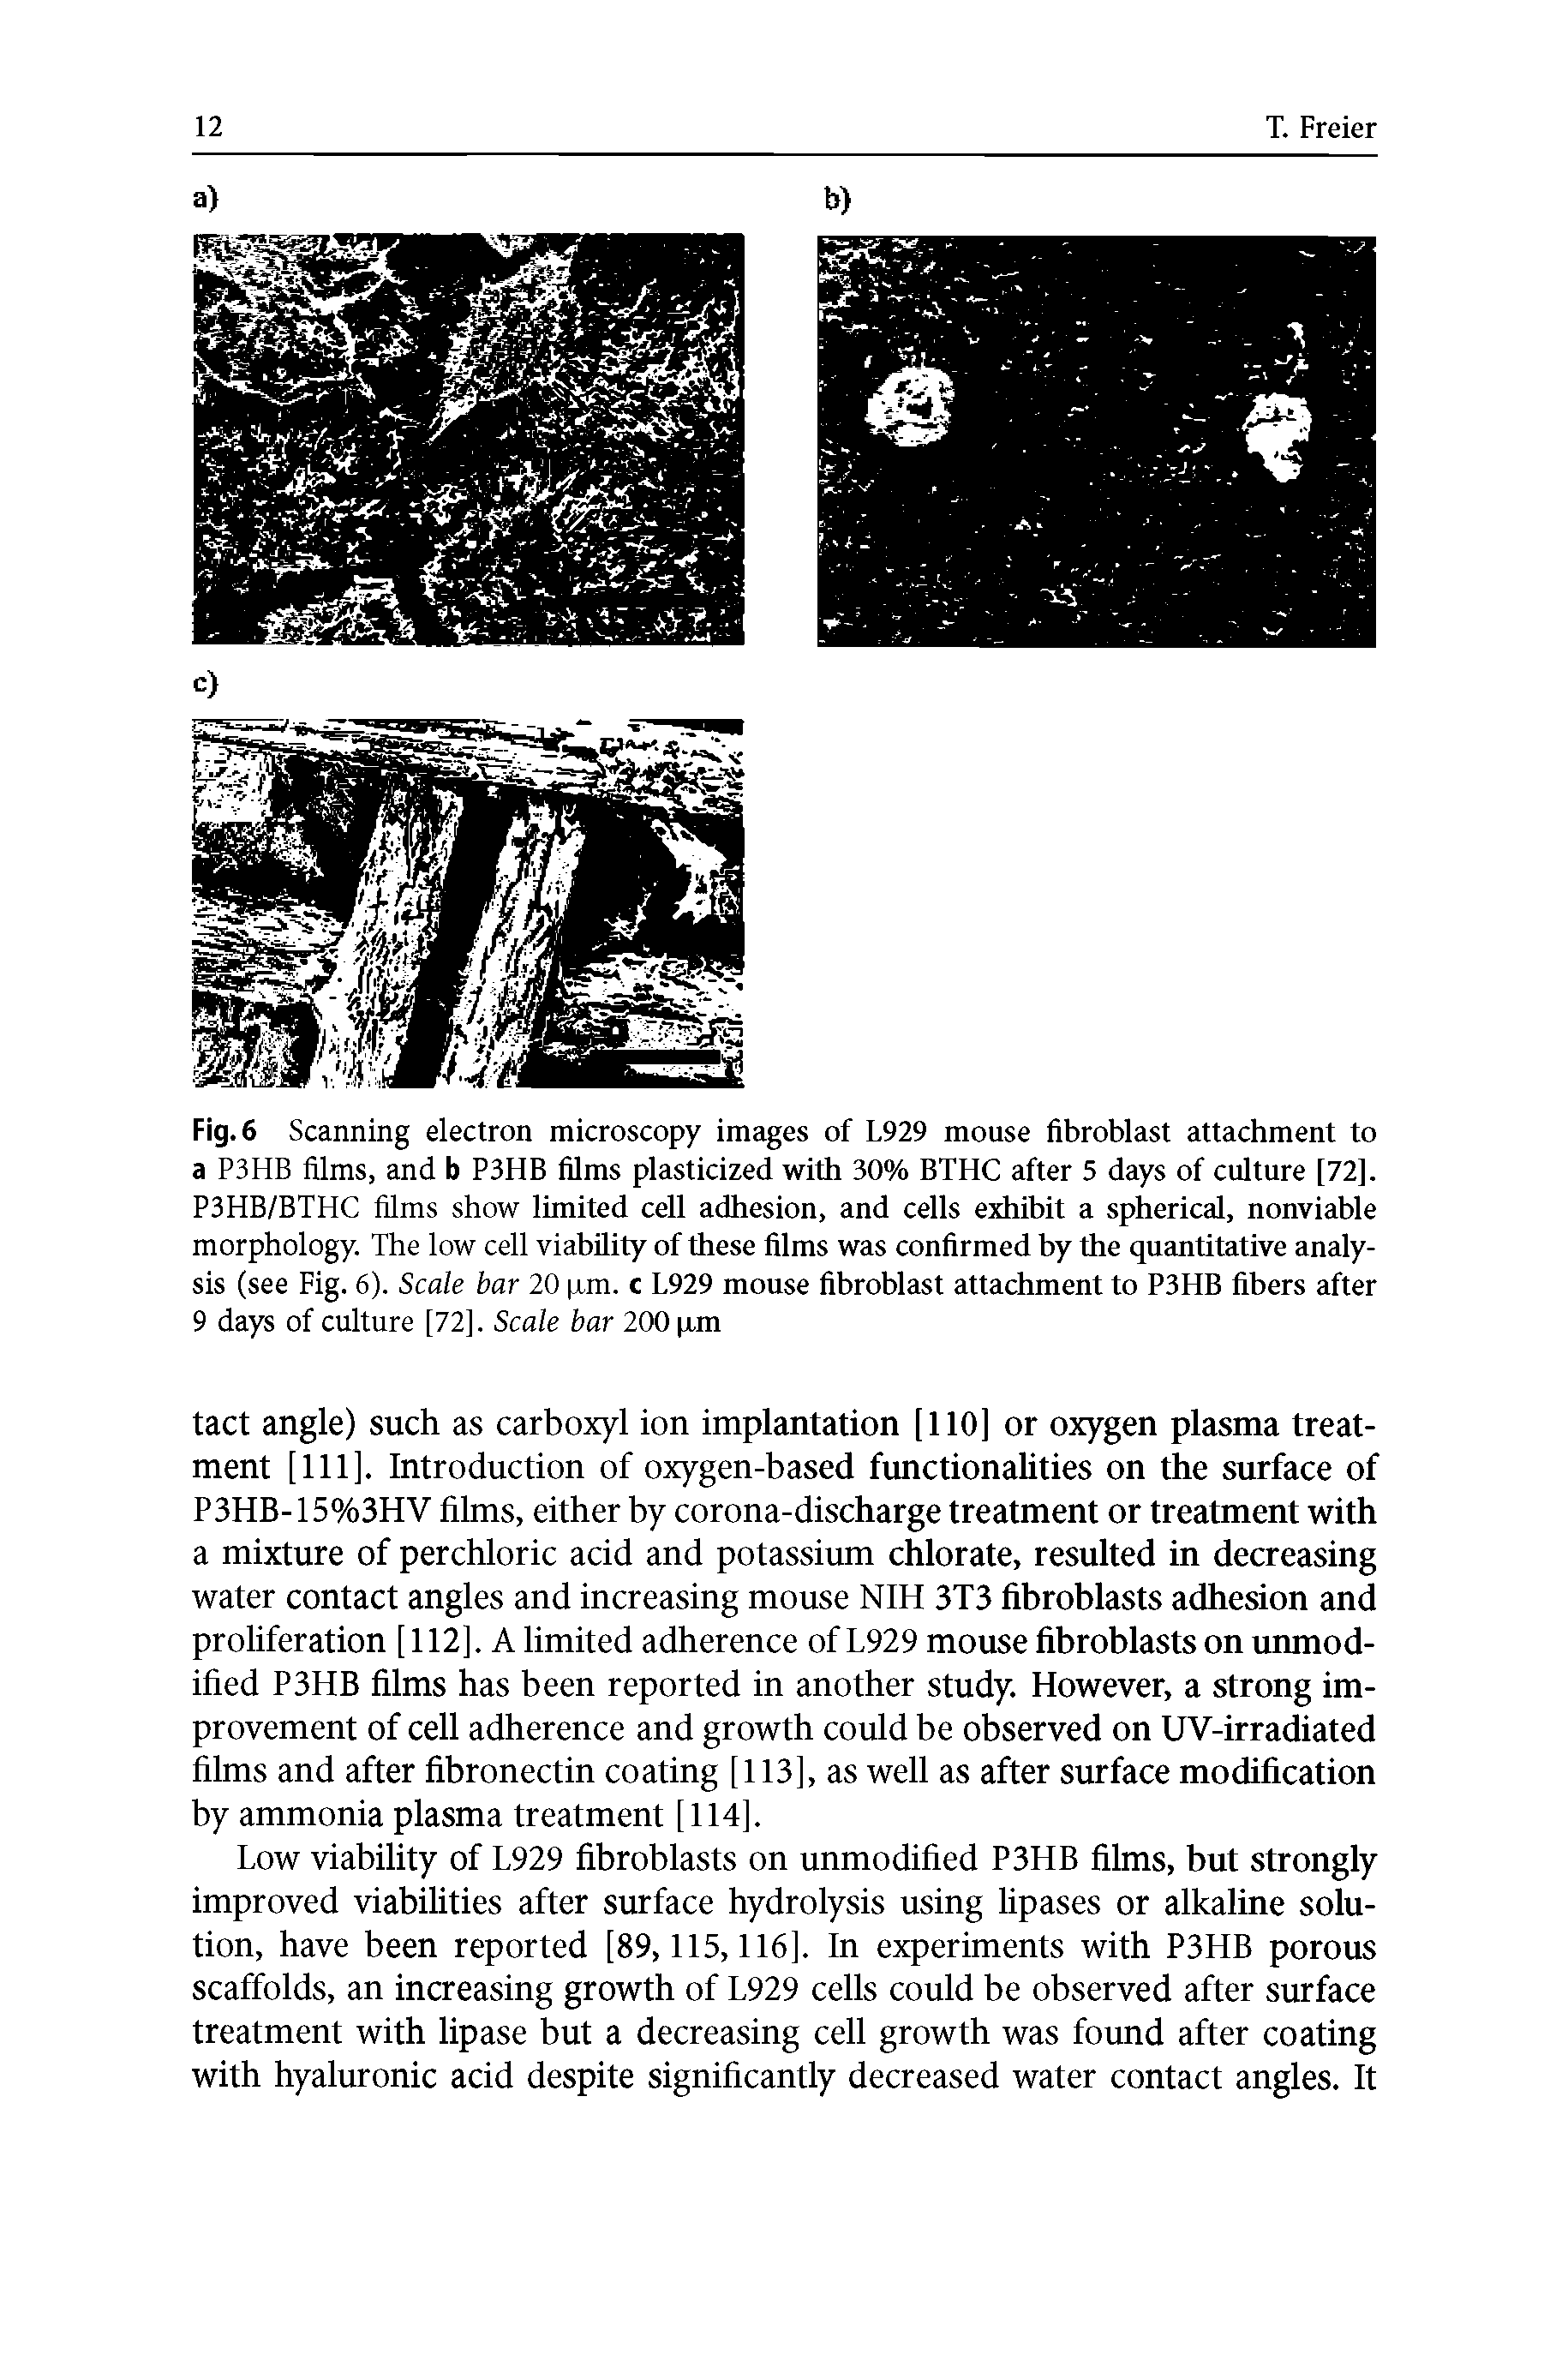 Fig. 6 Scanning electron microscopy images of L929 mouse fibroblast attachment to a P3HB films, and b P3HB films plasticized with 30% BTHC after 5 days of culture [72]. P3HB/BTHC films show limited ceU adhesion, and cells exhibit a spherical, nonviable morphology. The low cell viability of these films was confirmed by the quantitative analysis (see Fig. 6). Scale bar 20 xm. c L929 mouse fibroblast attachment to P3HB fibers after 9 days of culture [72]. Scale bar 200 jjim...